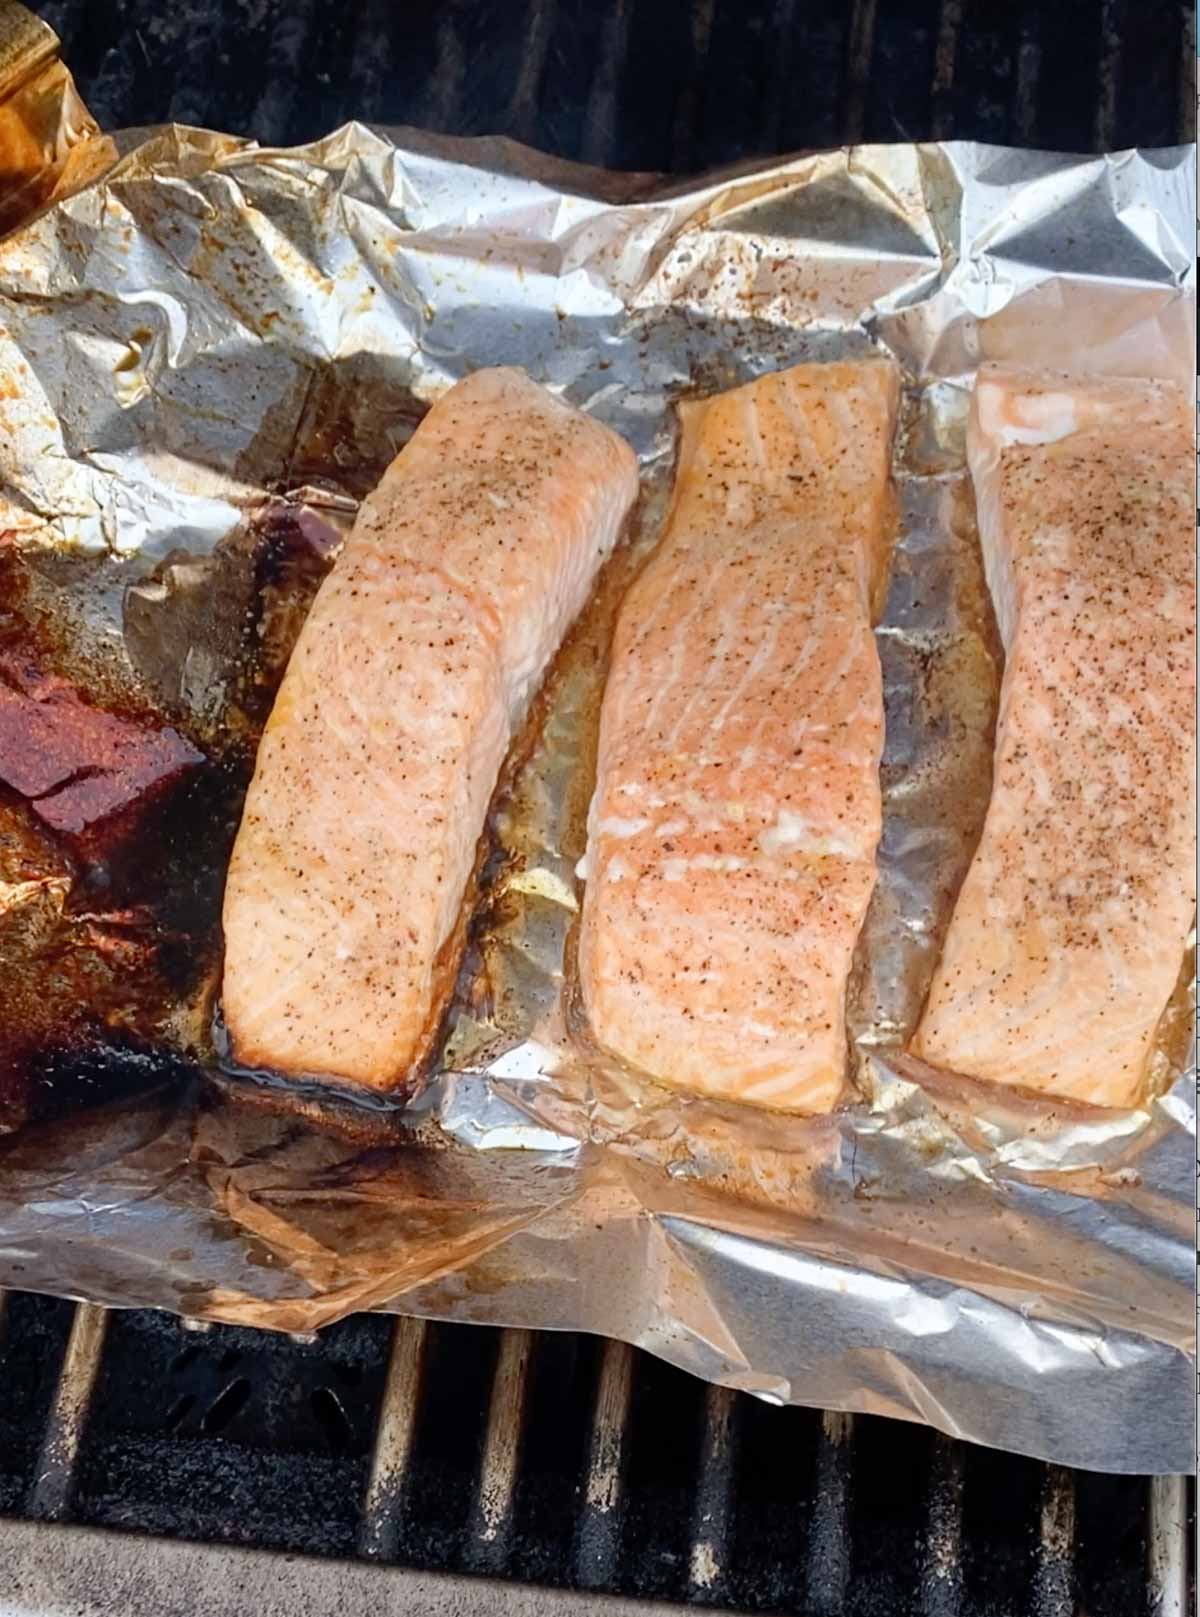 Salmon being cooked on a gas grill.